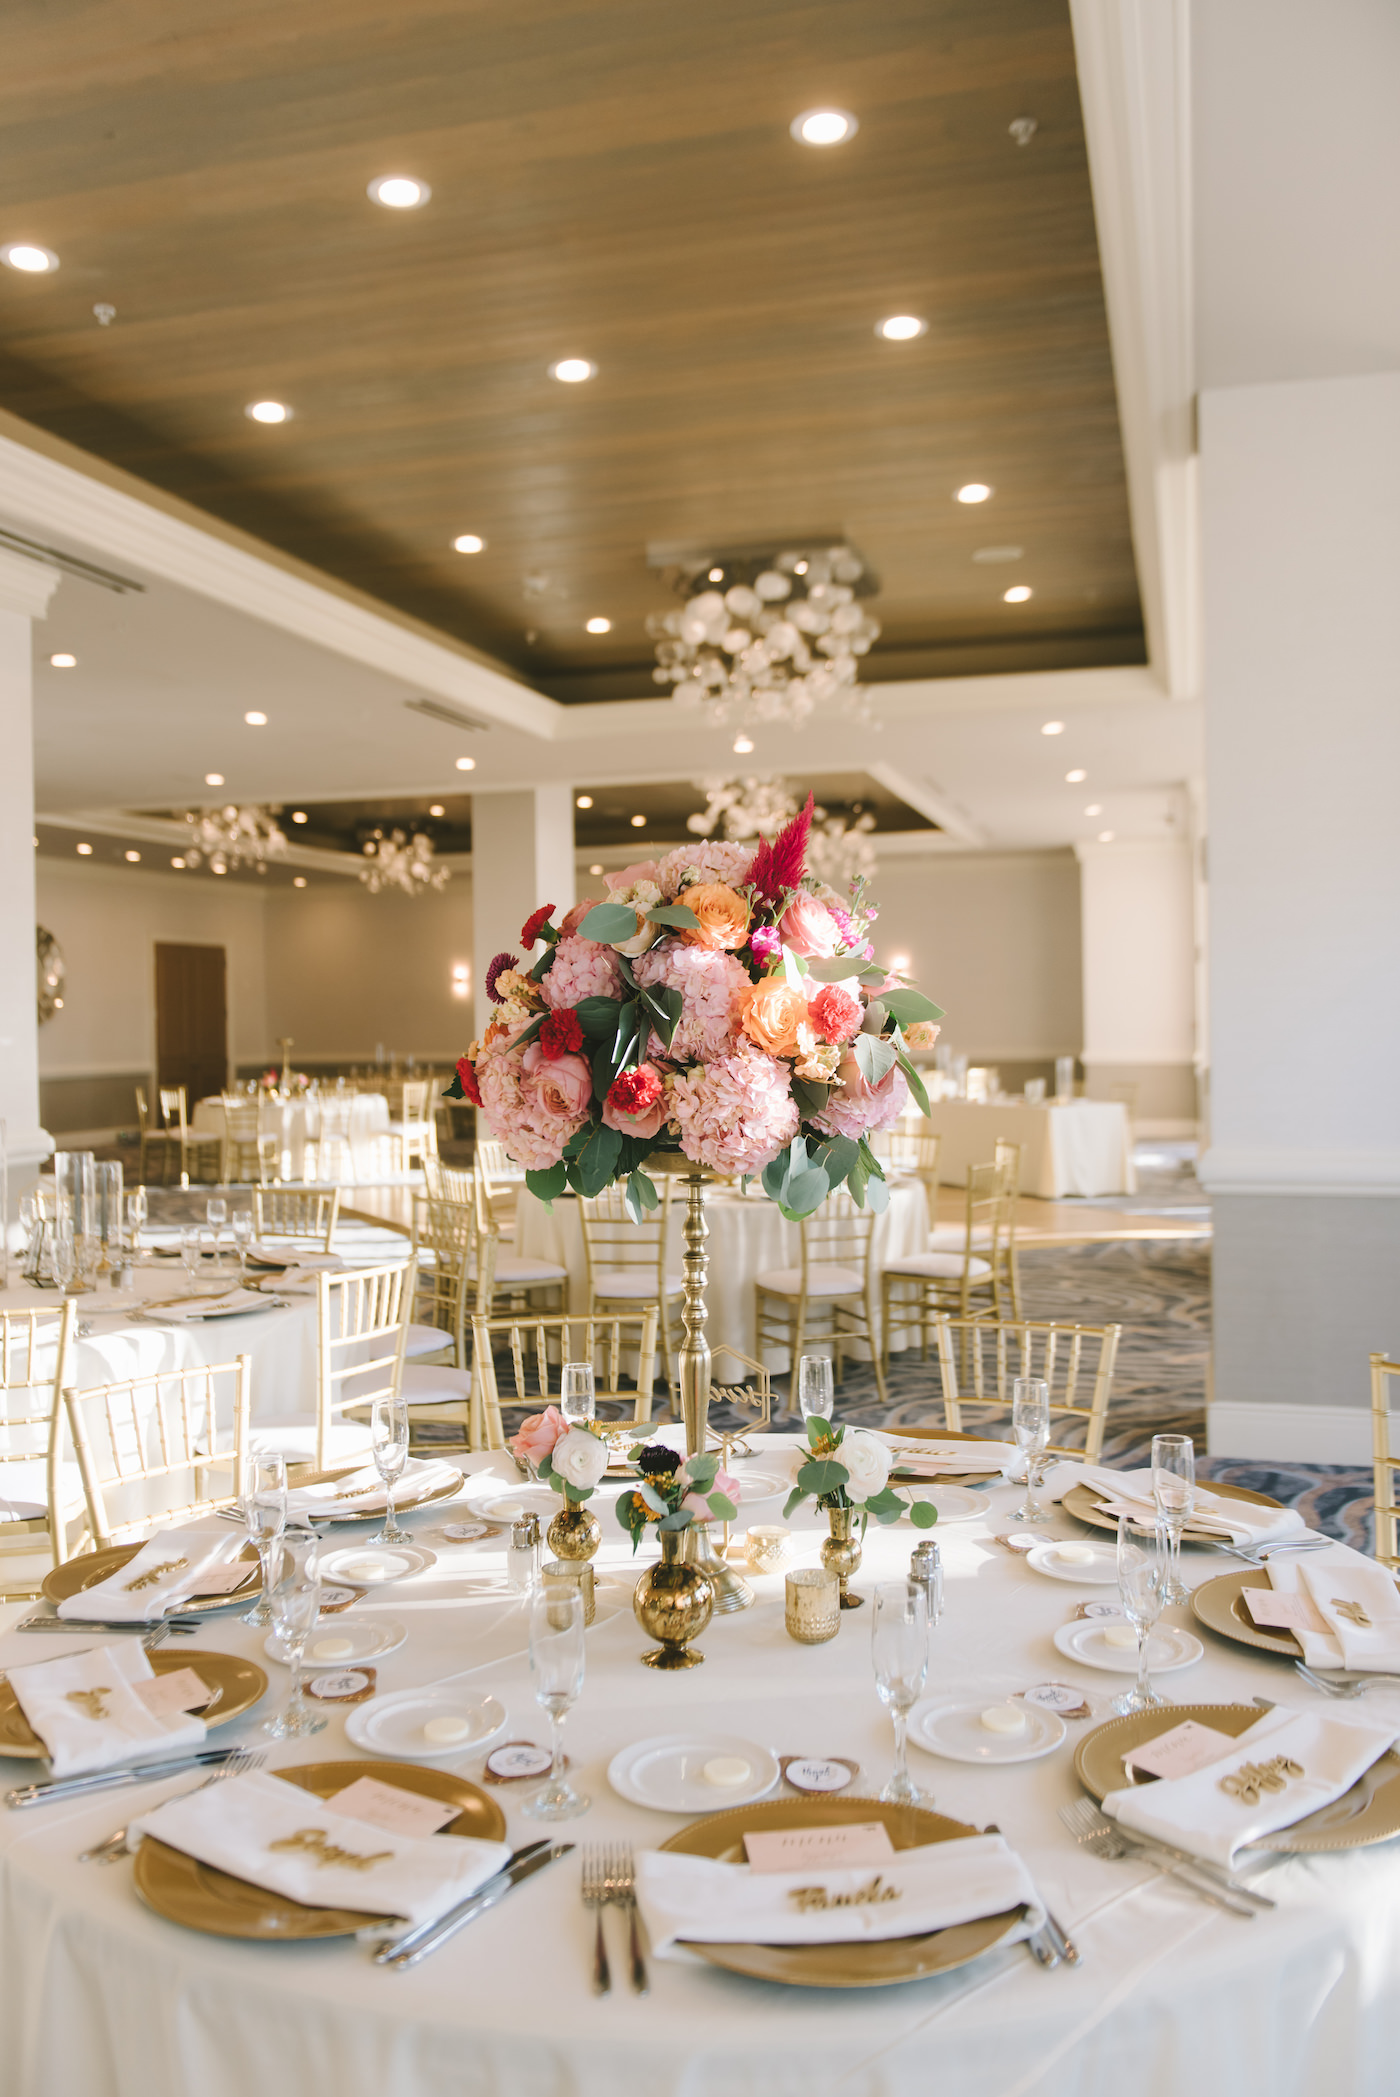 Clearwater Wedding Venue The Hyatt Regency Clearwater Beach Reception Ballroom with White Table Linens and Gold Chiavari Chairs and Gold Charger Plates | Vibrant Bright Colorful Tall Centerpieces with Pink Hydrangea and Orange Roses atop Gold Candlesticks | Gabro Event Services Wedding Rentals